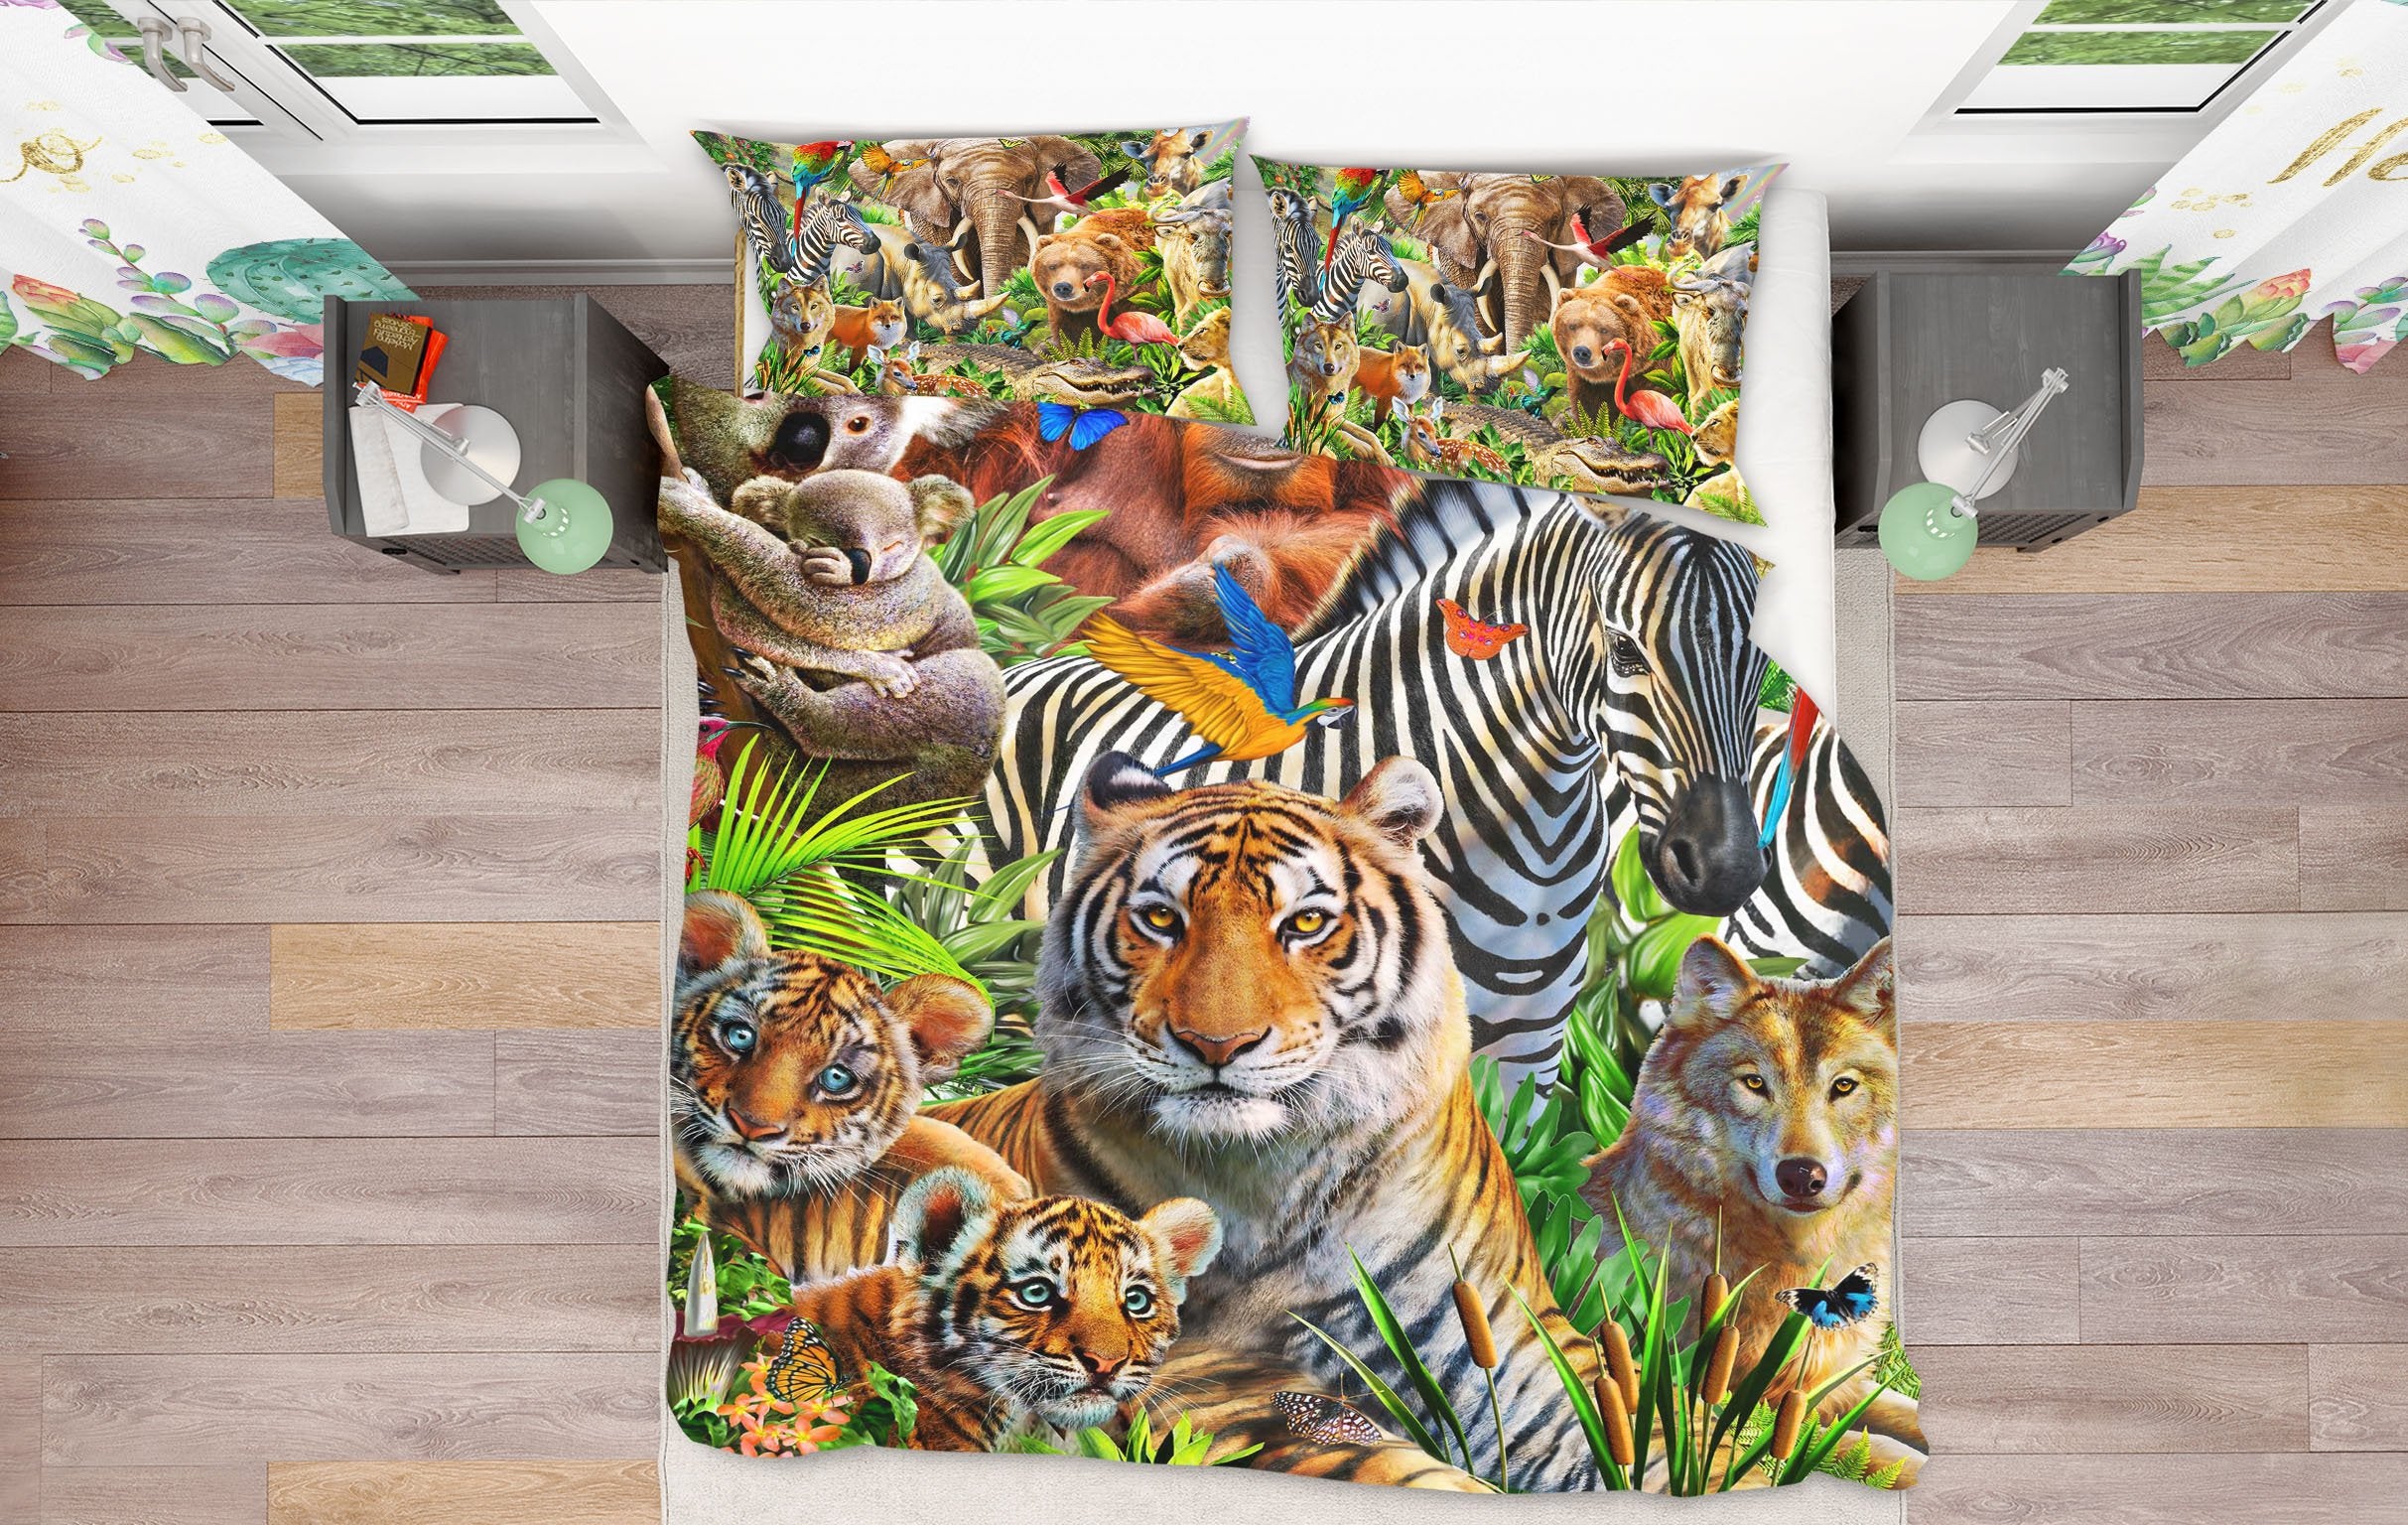 3D Animal World 2130 Adrian Chesterman Bedding Bed Pillowcases Quilt Quiet Covers AJ Creativity Home 